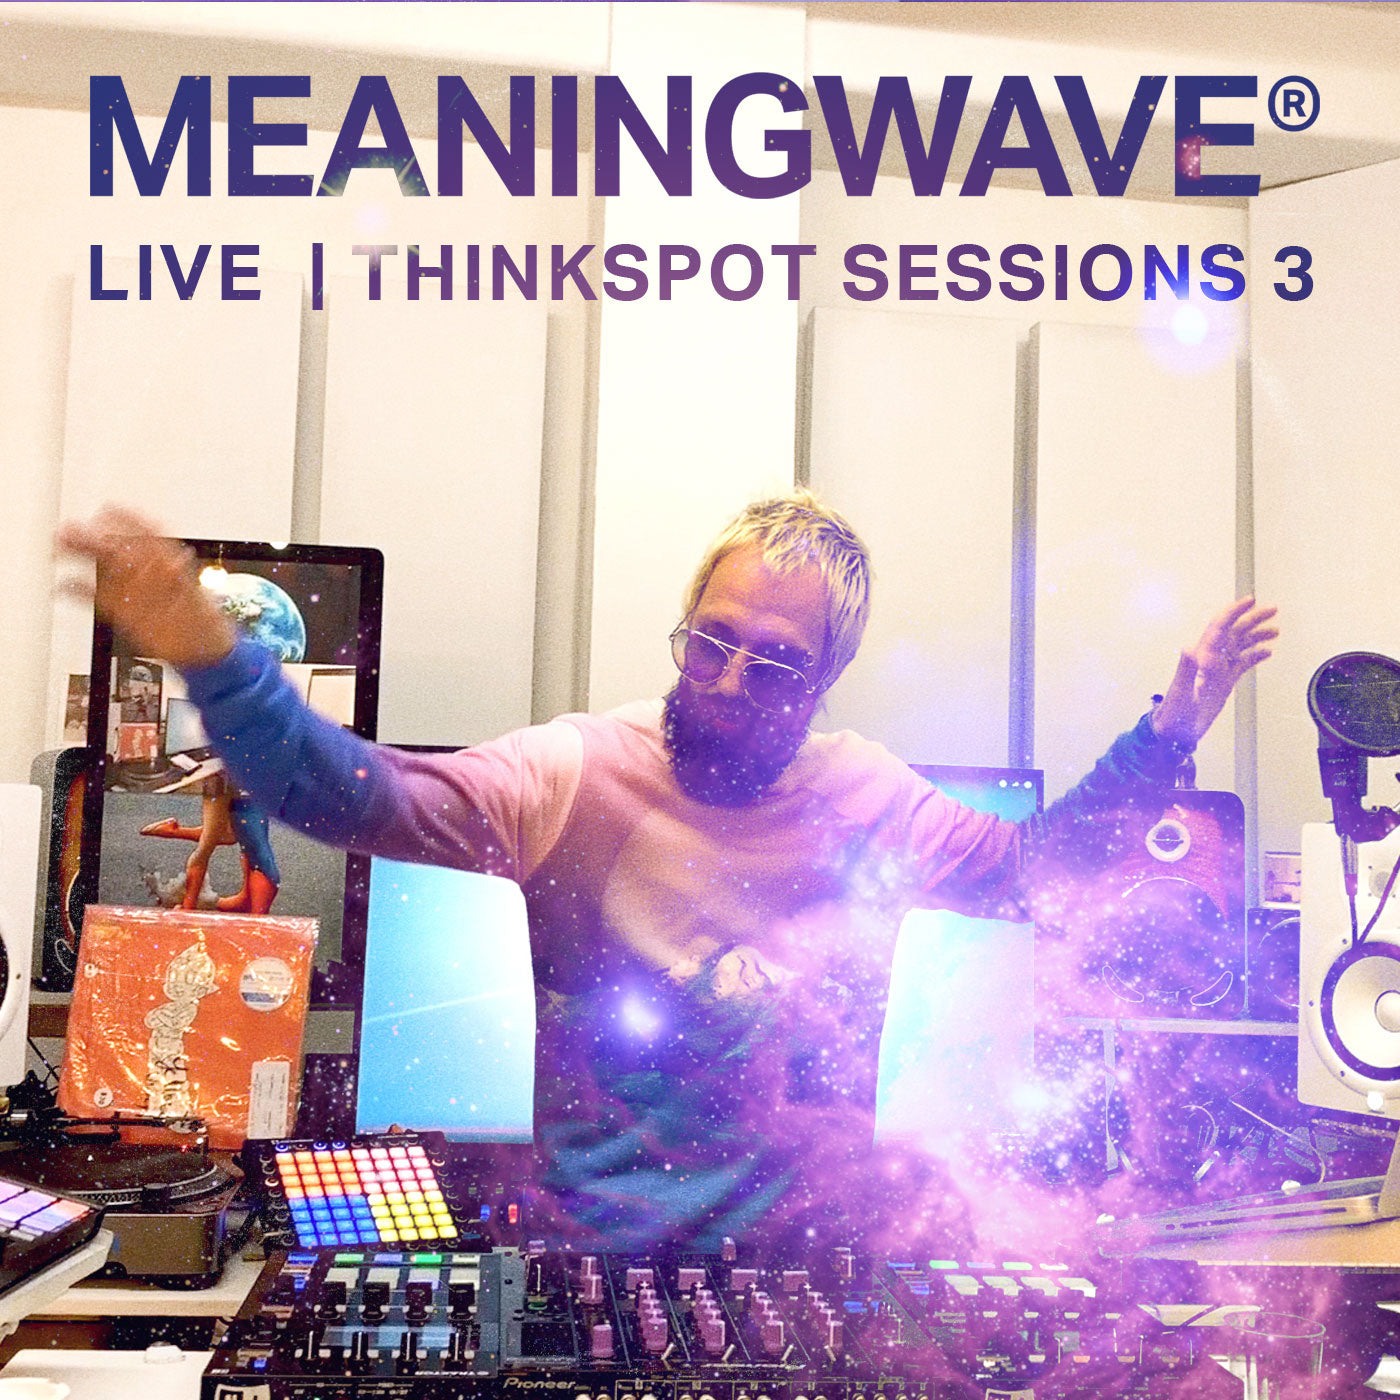 MEANINGWAVE LIVE - Thinkspot Sessions 3